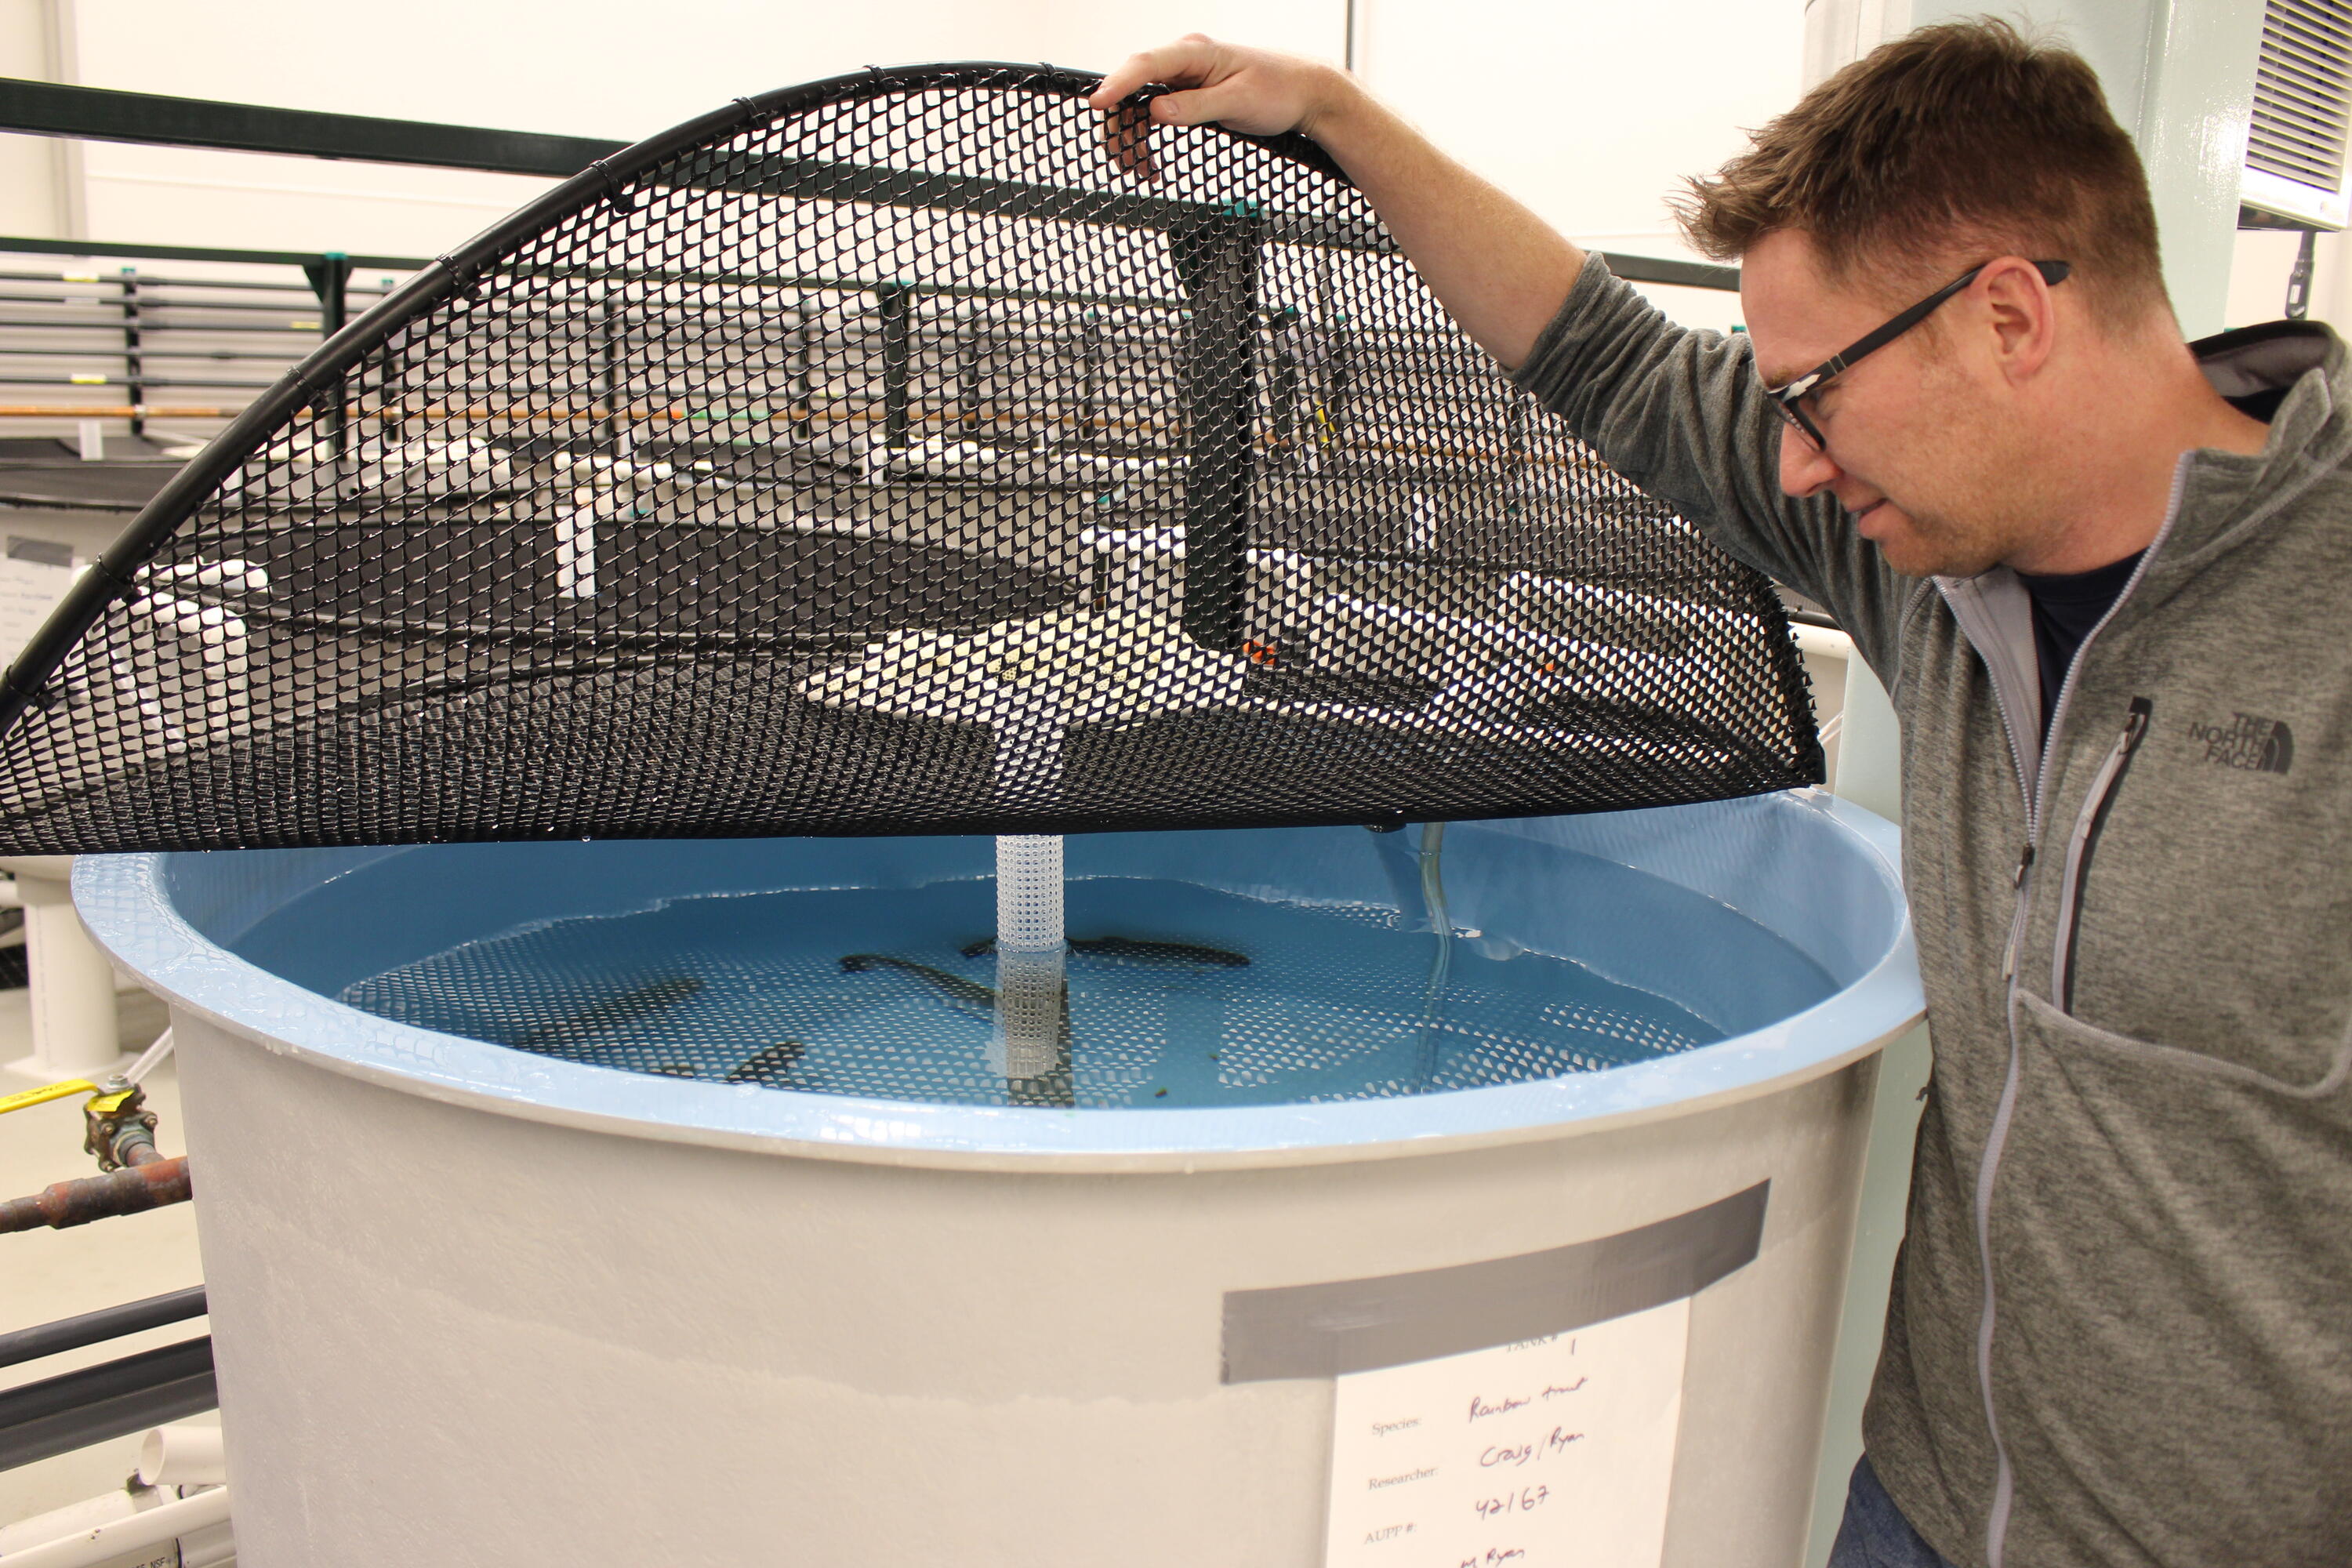 Professor Craig looks at fish in a tank at the new WATER facility